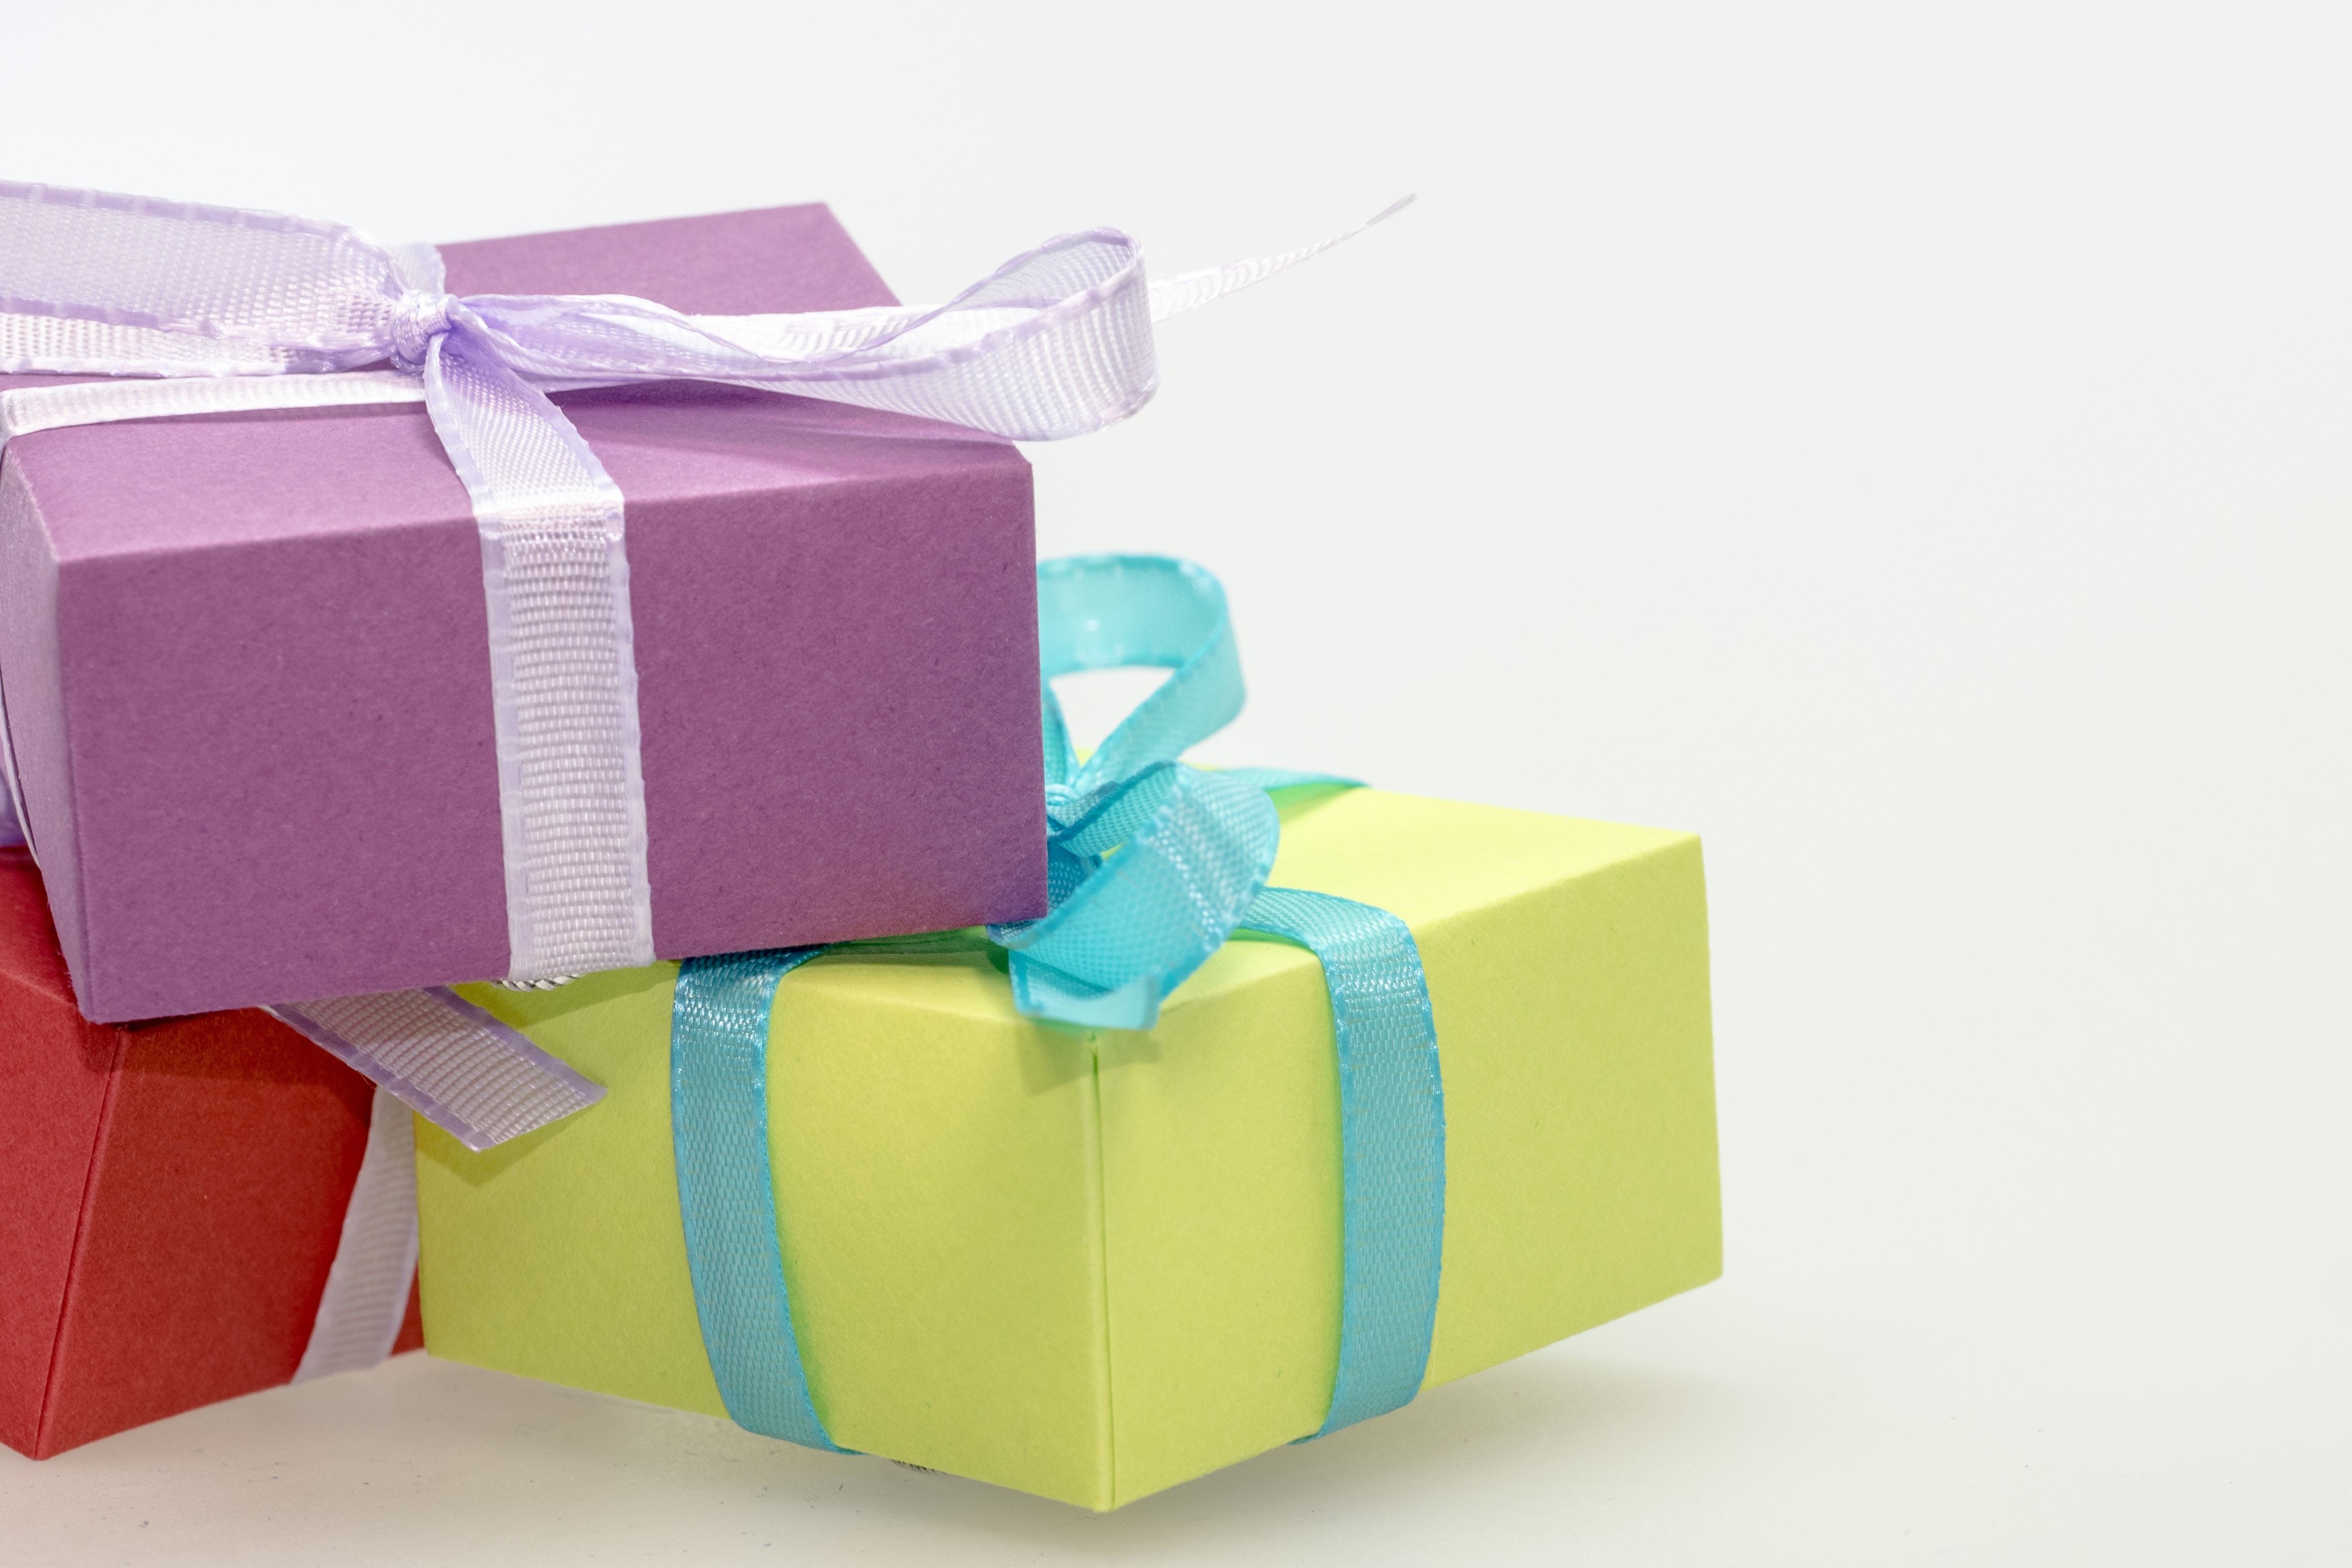 3 pieces of gift boxes